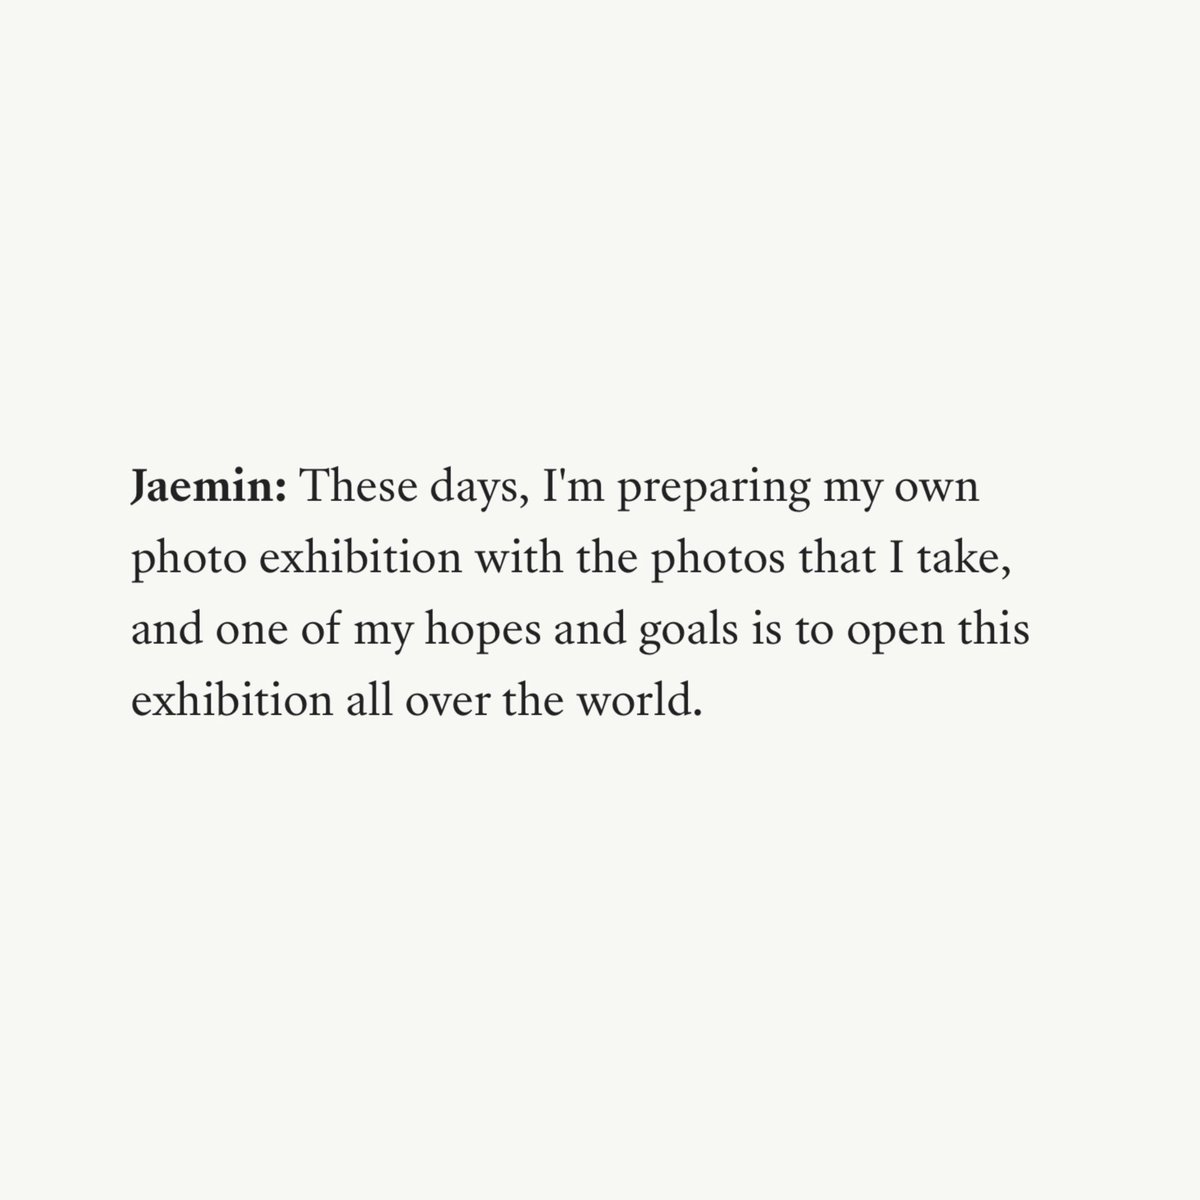 💬 …but is there something on your bucket list that you want to cross off before the end of the year? jaemin: “these days, i’m preparing for my own photo exhibition with the photos that i take, and one of my hopes and goals is to open this exhibition all over the world.”